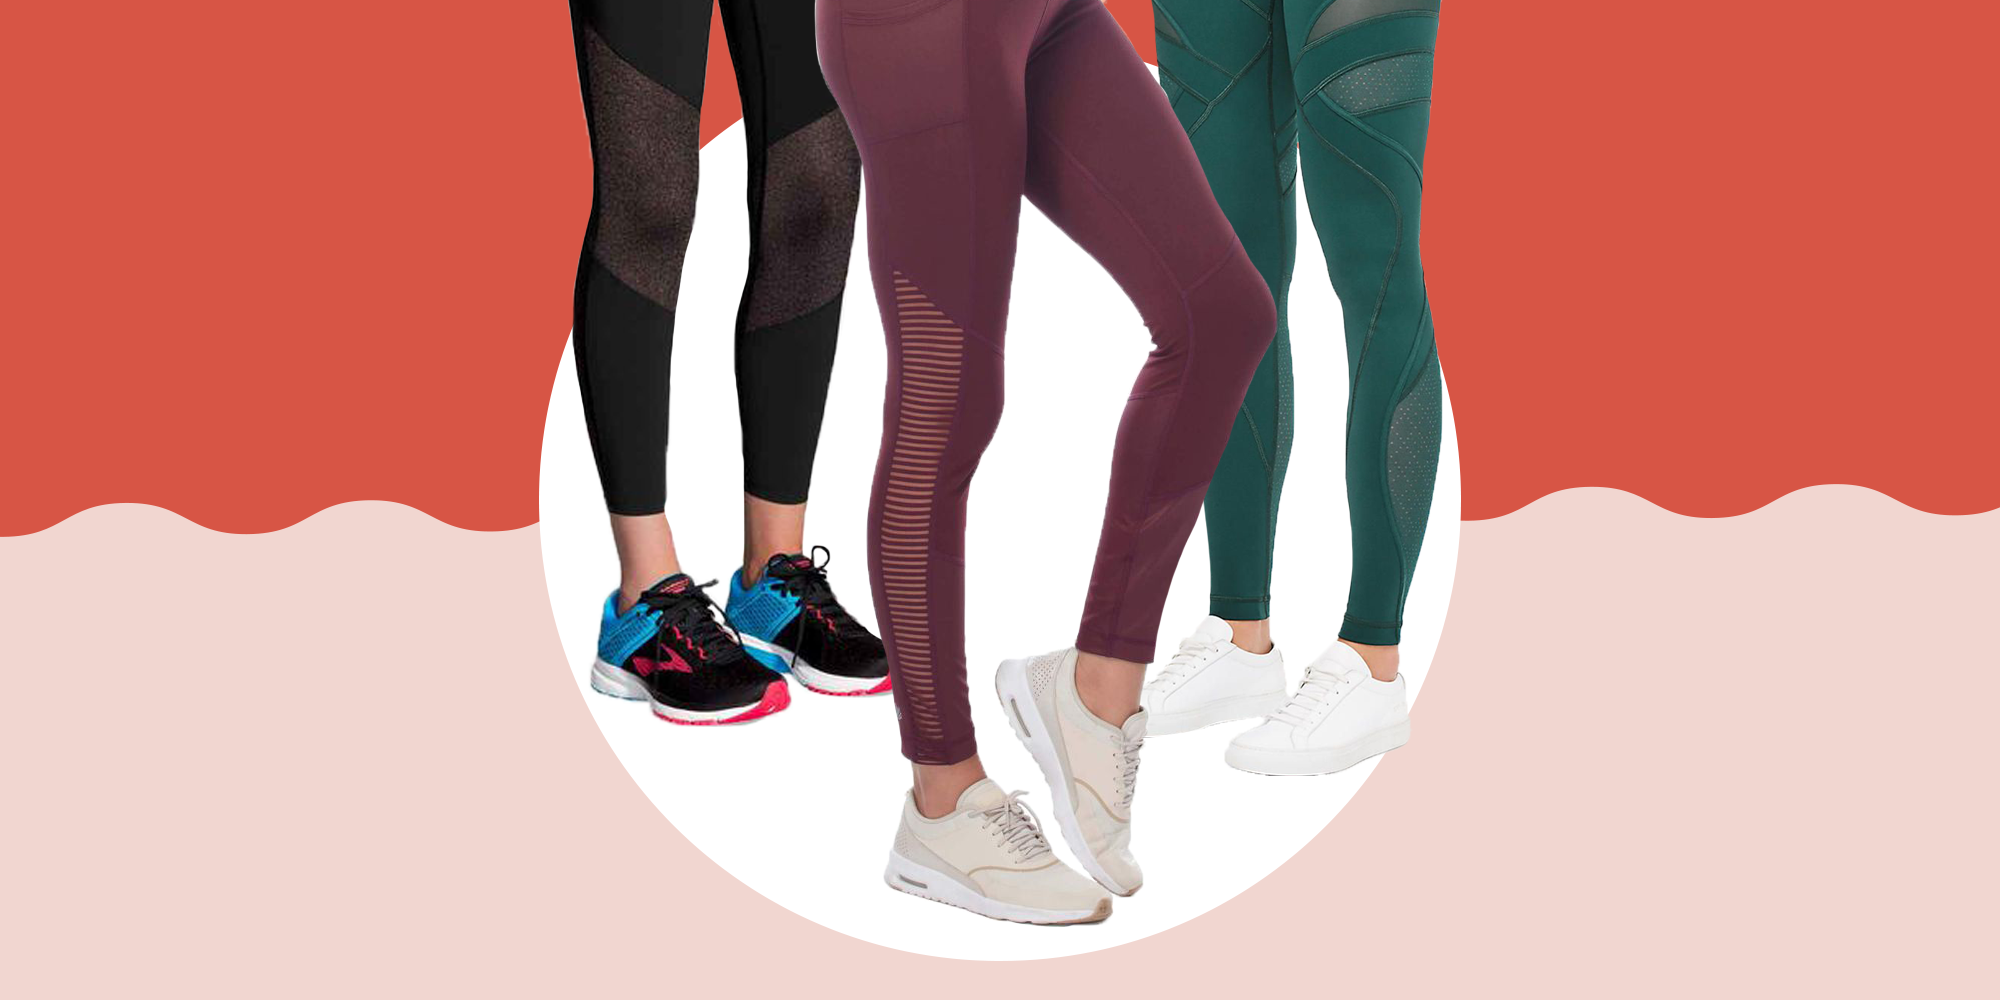 Womens Active Leggings with Mesh Cutouts 